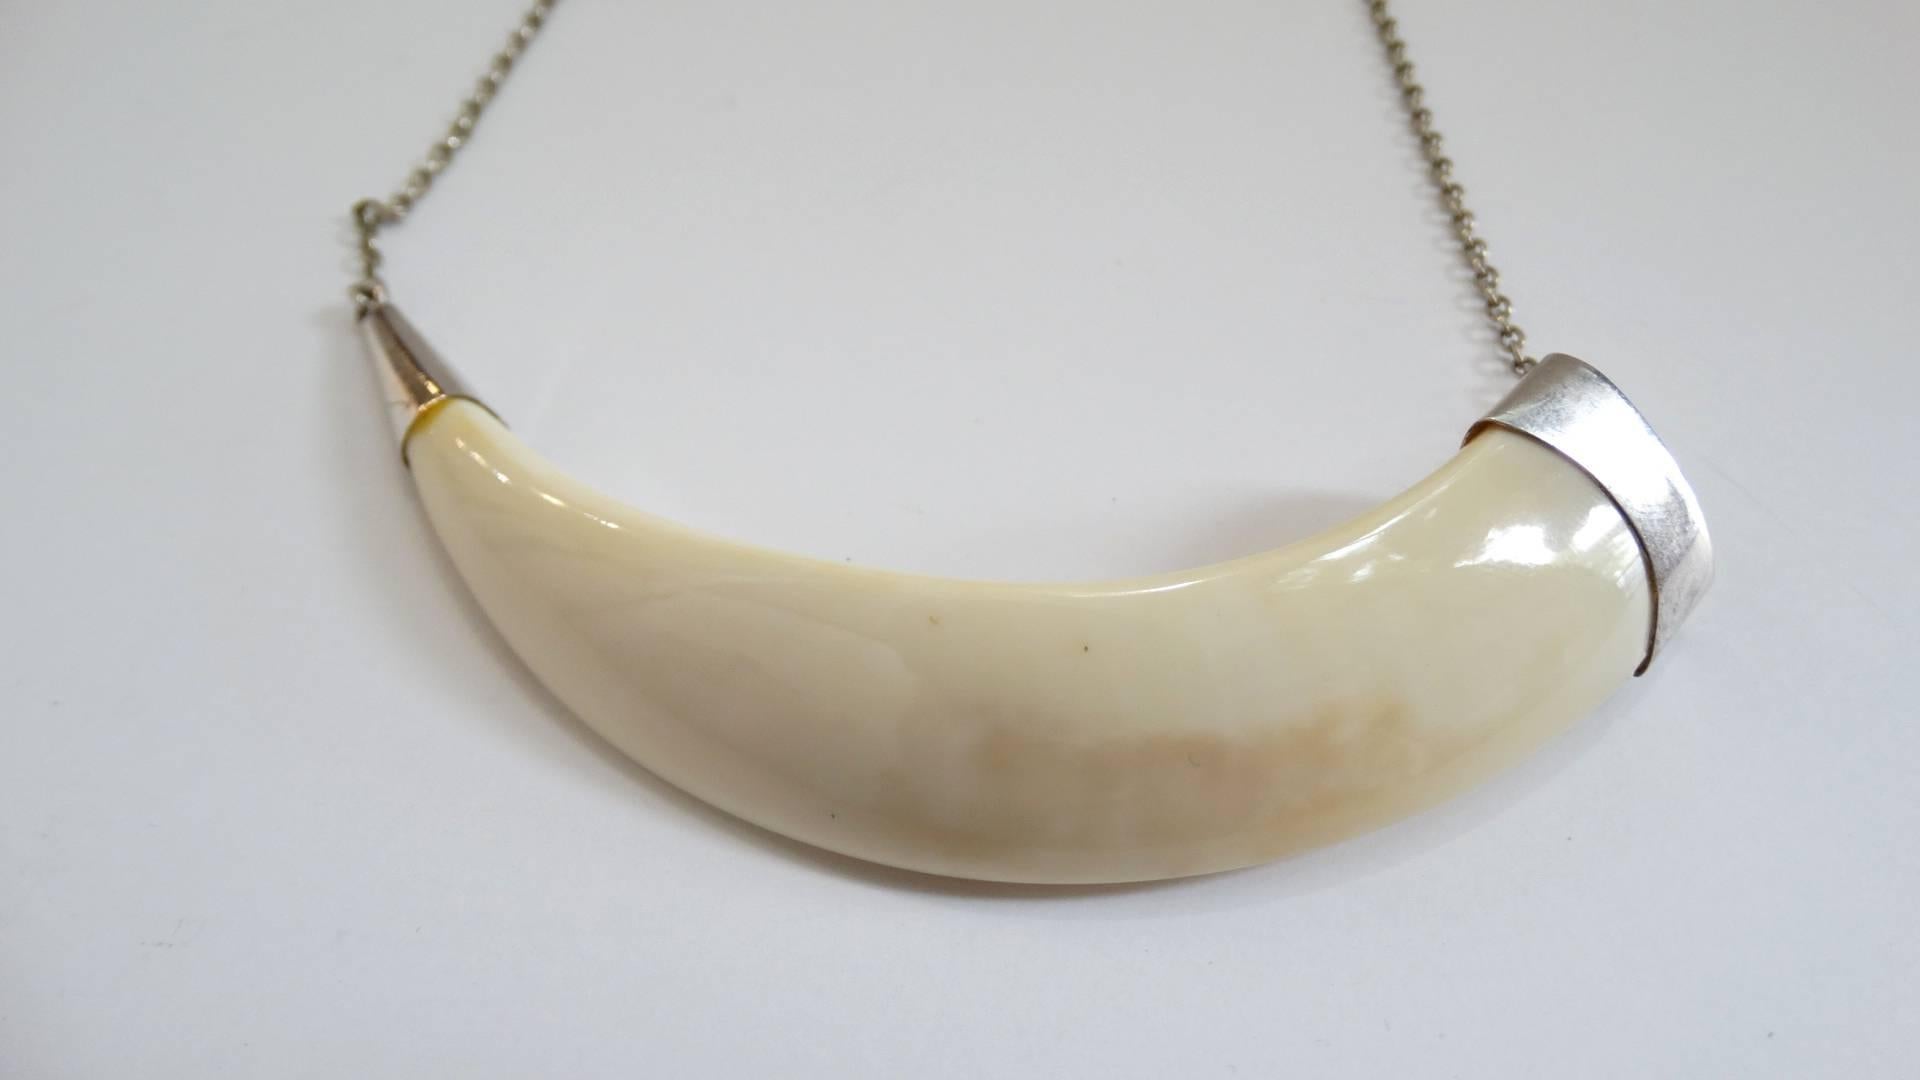 The perfect piece to add to your layered necklace looks- this unique boars tusk necklace! Polished boars tusk encased in sterling silver at either end, each attached to thin silver chain. Signed at the back of the  tusk charm. 


Tusk Pendant Width: